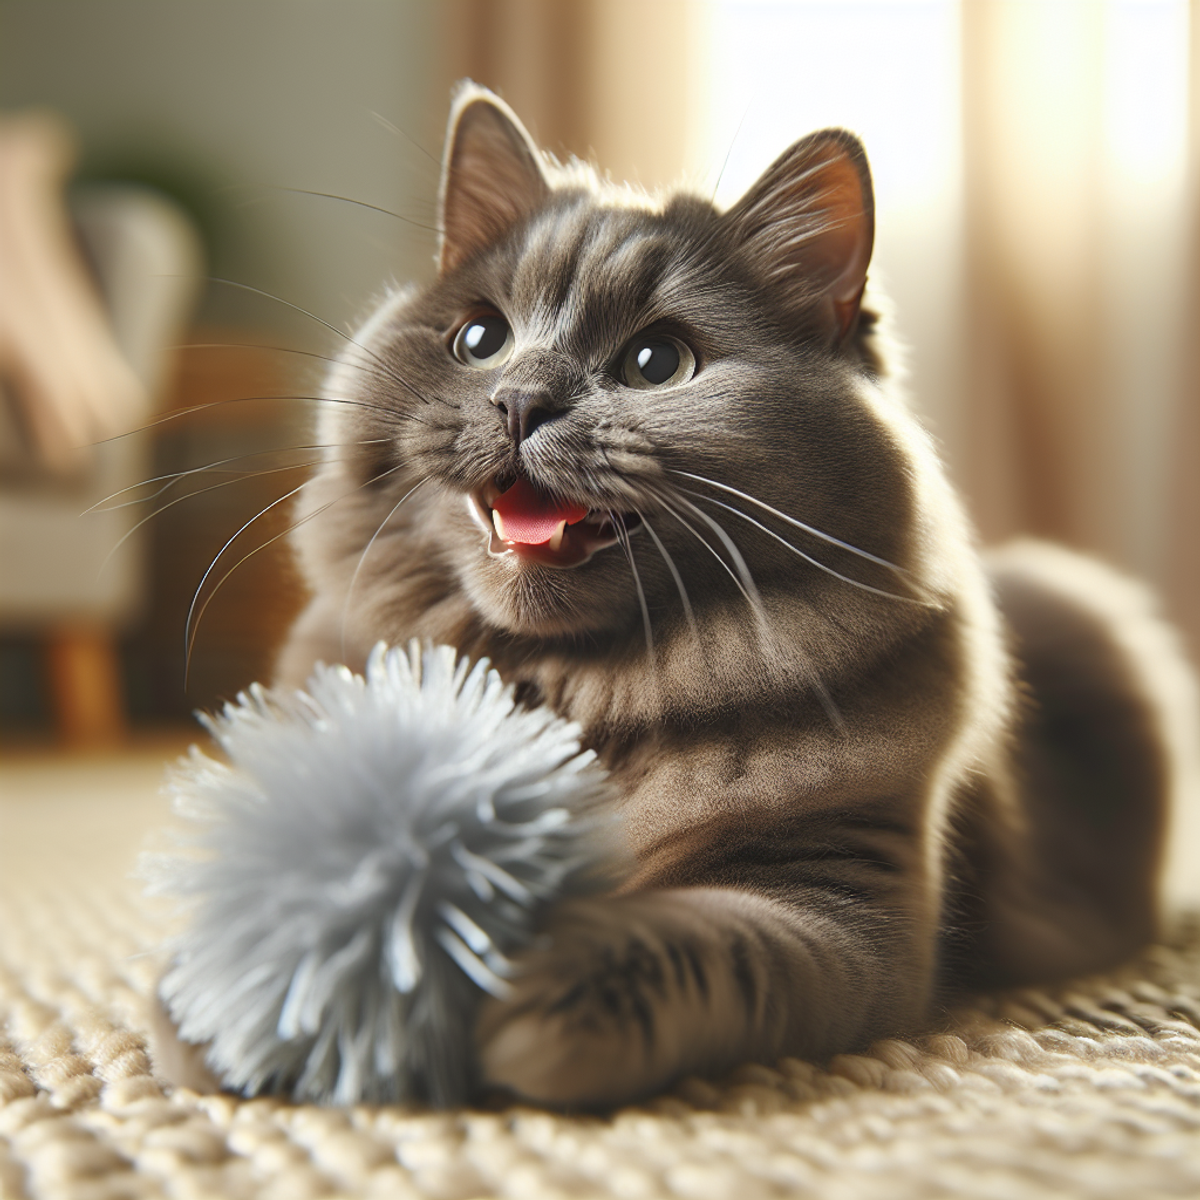 A senior grey cat pouncing on a toy.